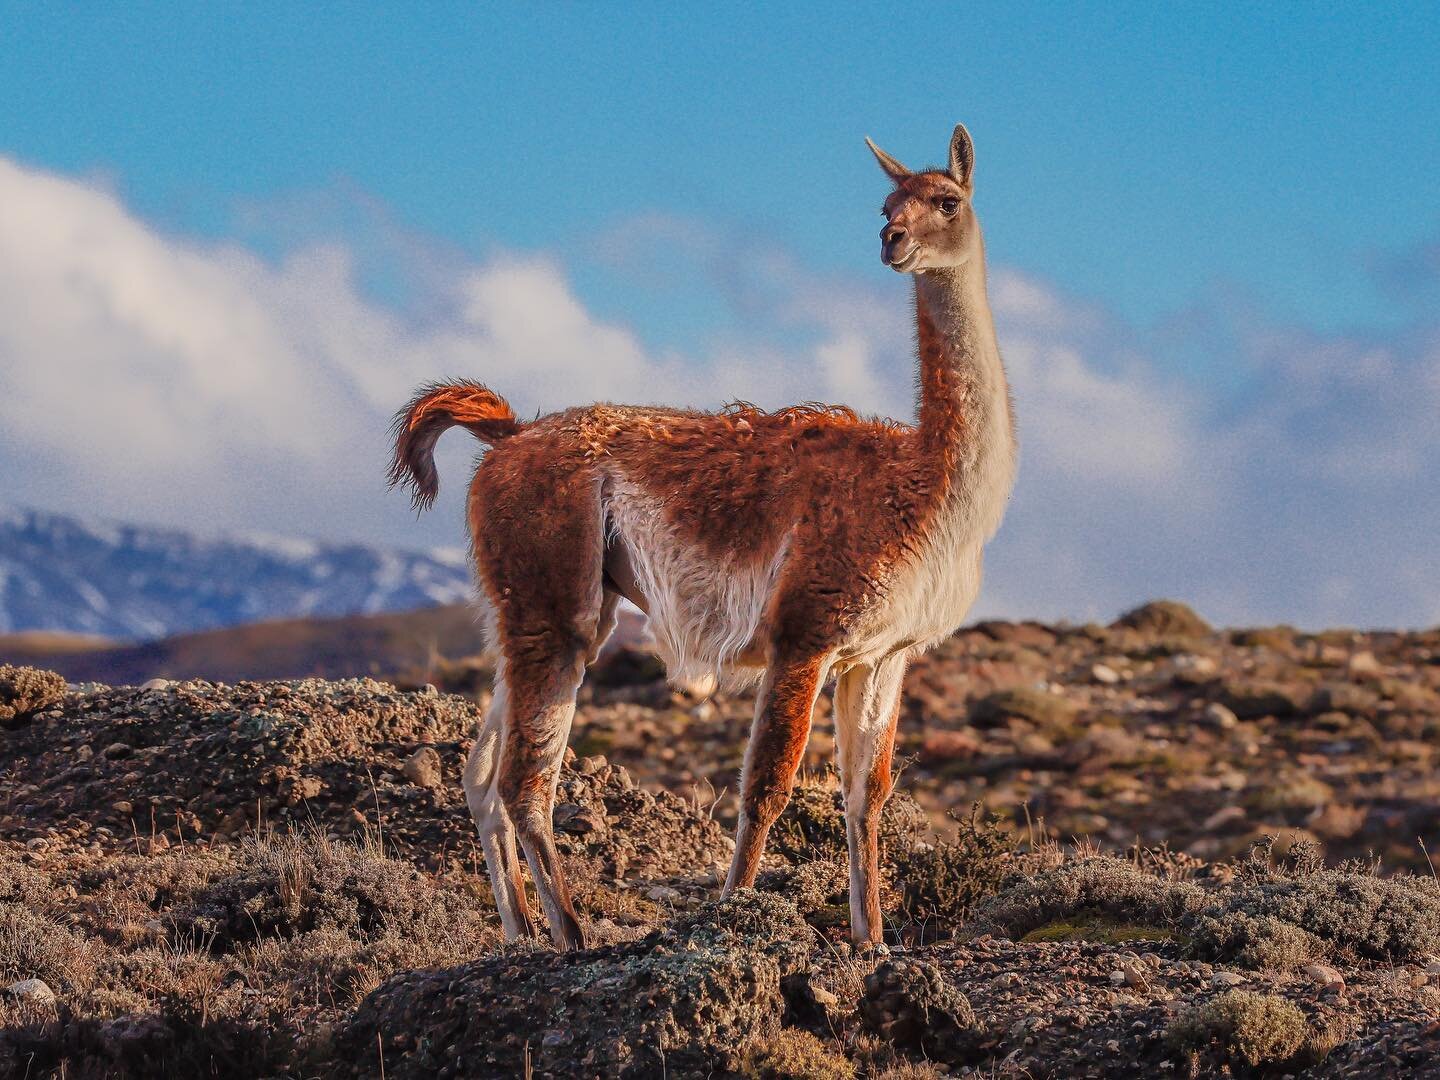 This is a Guanaco. They are not lamas. #notalama #guanacos #guanaco #chile #patagonia #toresdelpaine #animalsofinstagram #canonr5